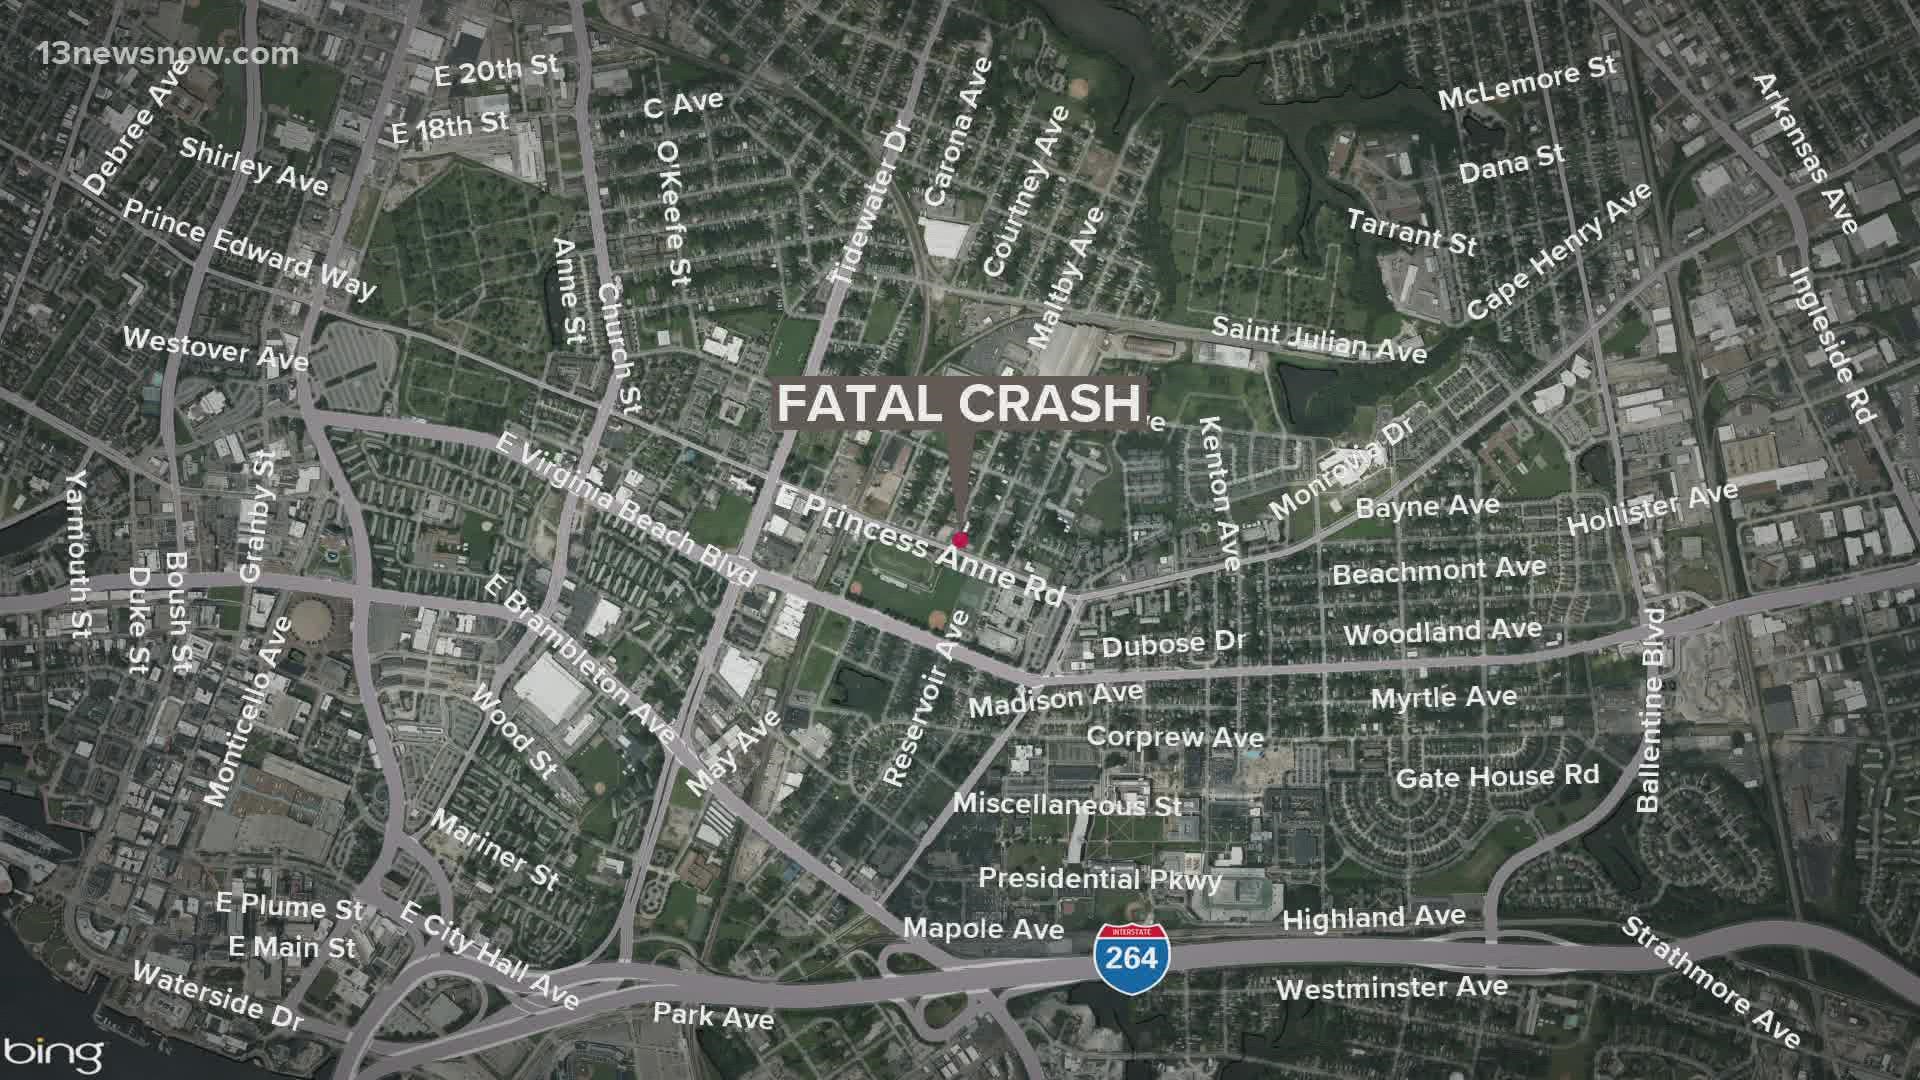 A person was killed in a vehicle crash on Princess Anne Road in Norfolk early Saturday morning.